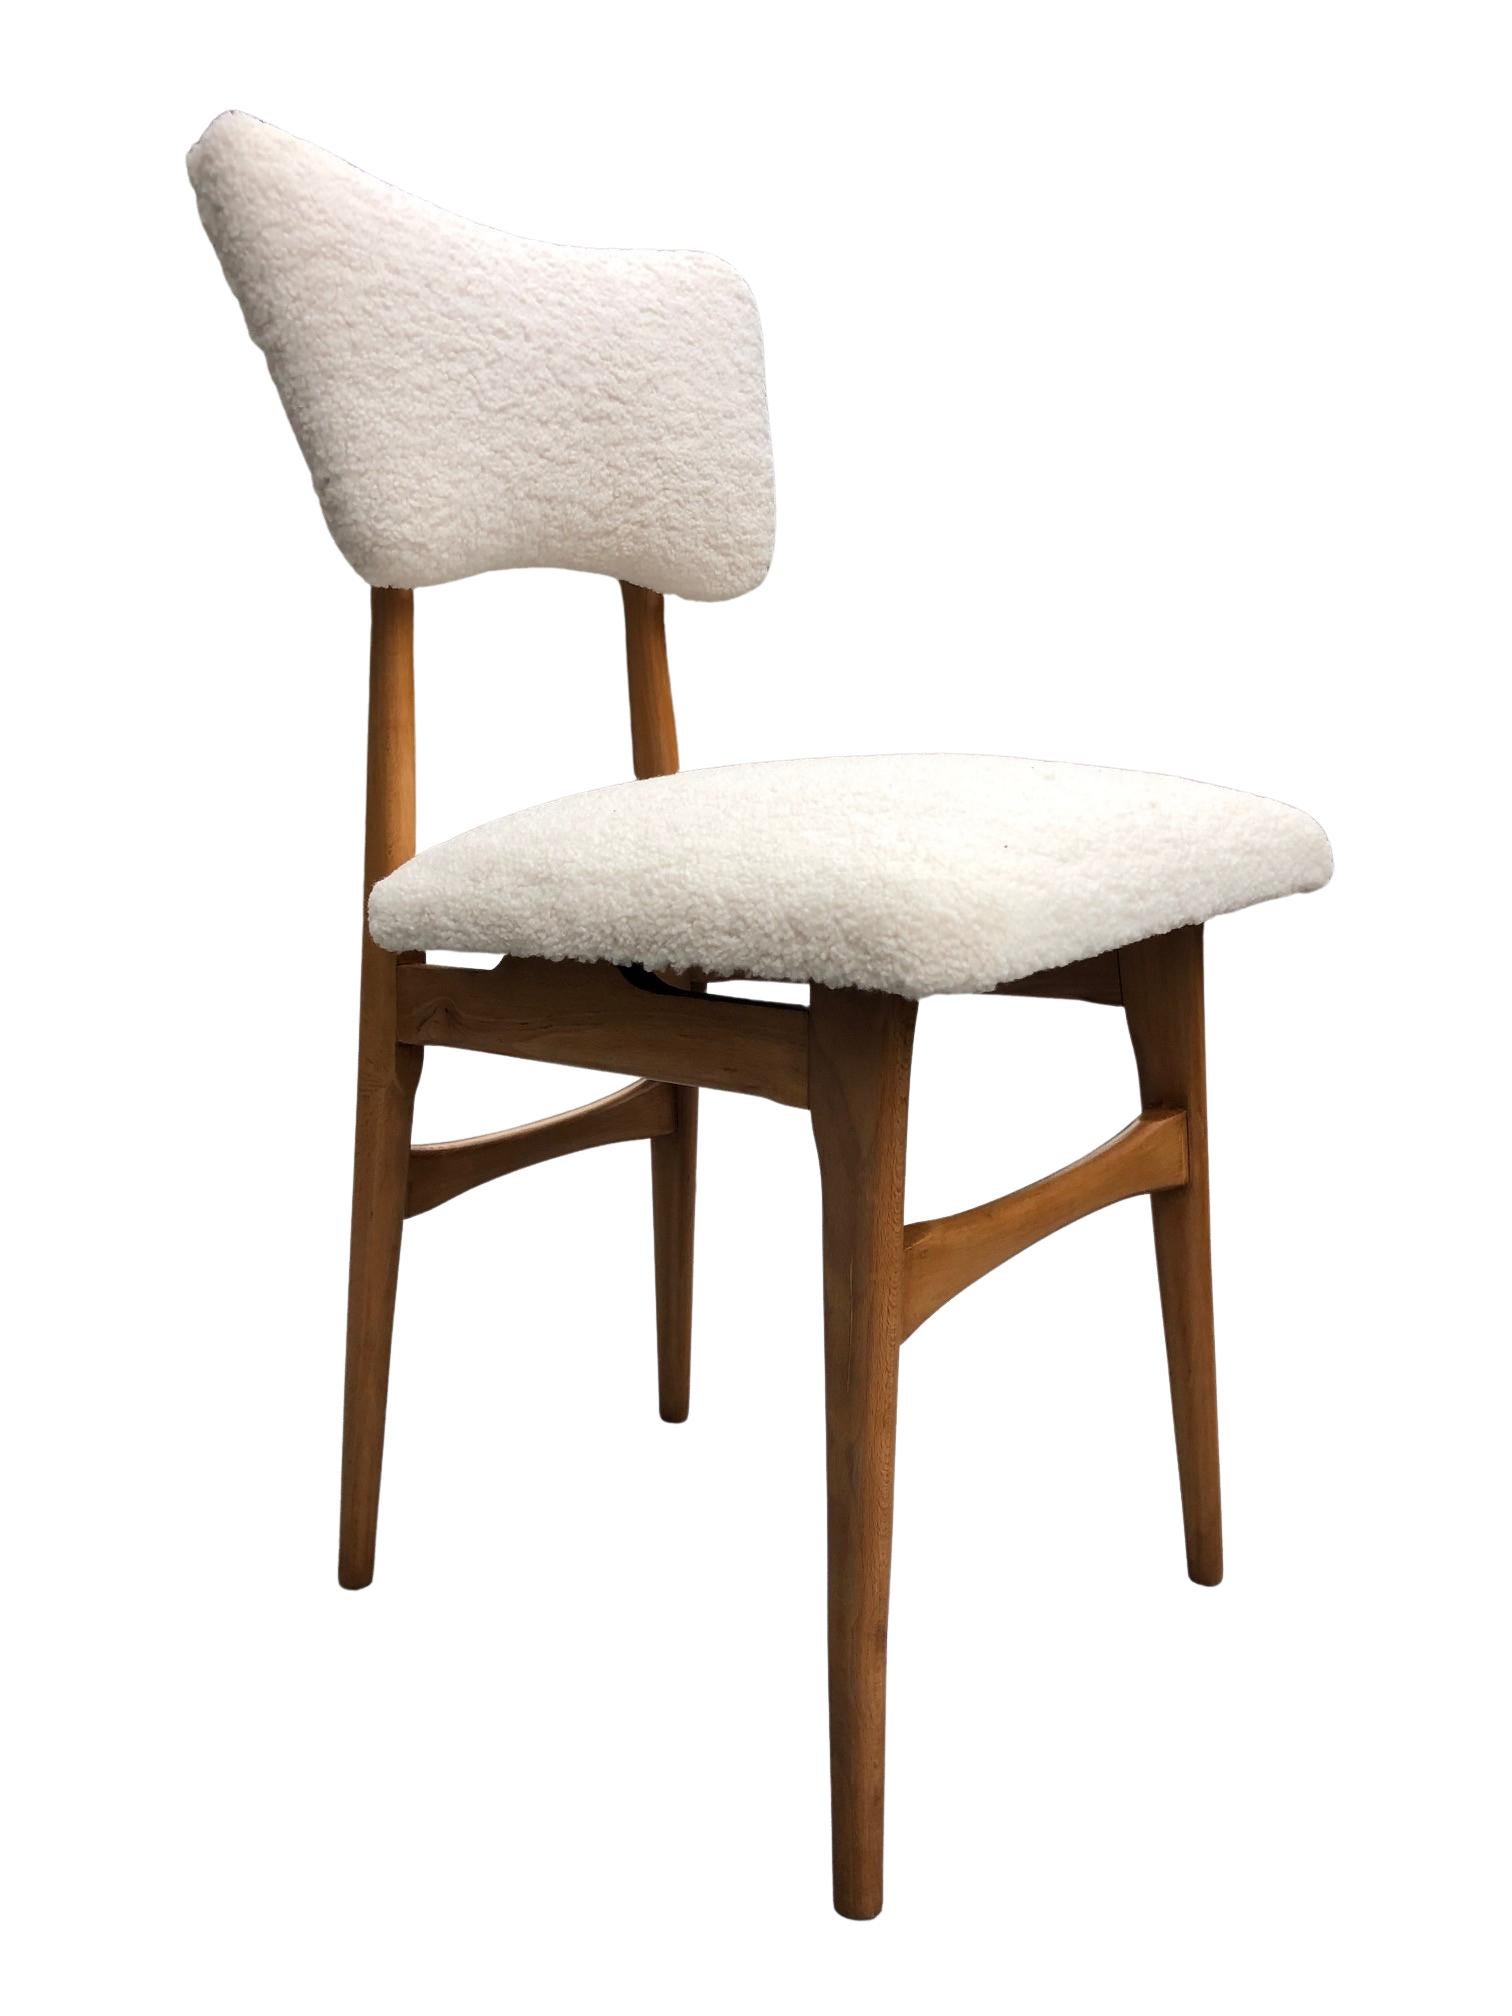 Midcentury Cream Bouclé and Wood Dining Chairs, Europe, 1960s, Set of Four For Sale 7